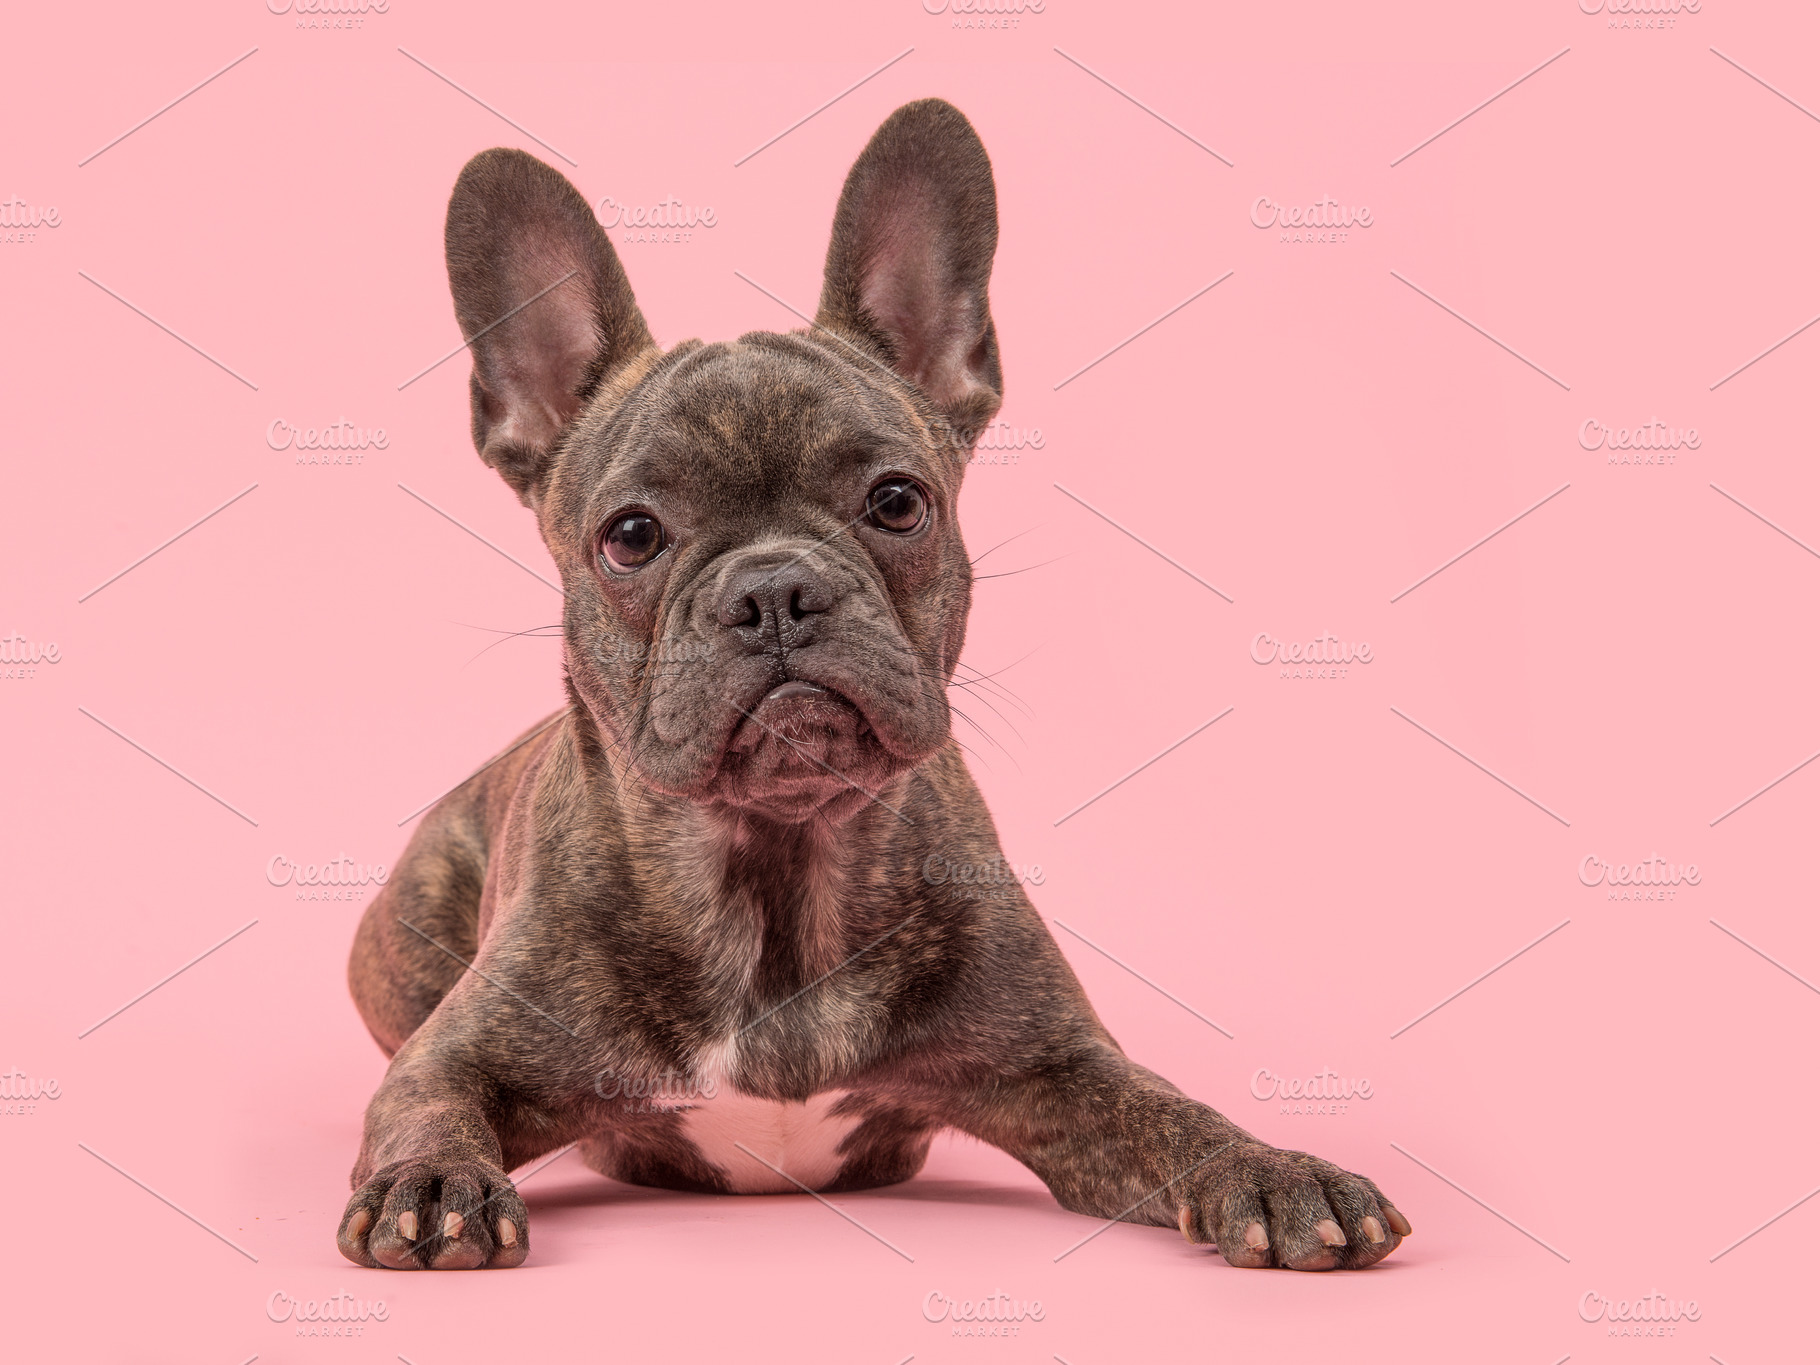 French bulldog on a pink background | High-Quality Animal Stock Photos